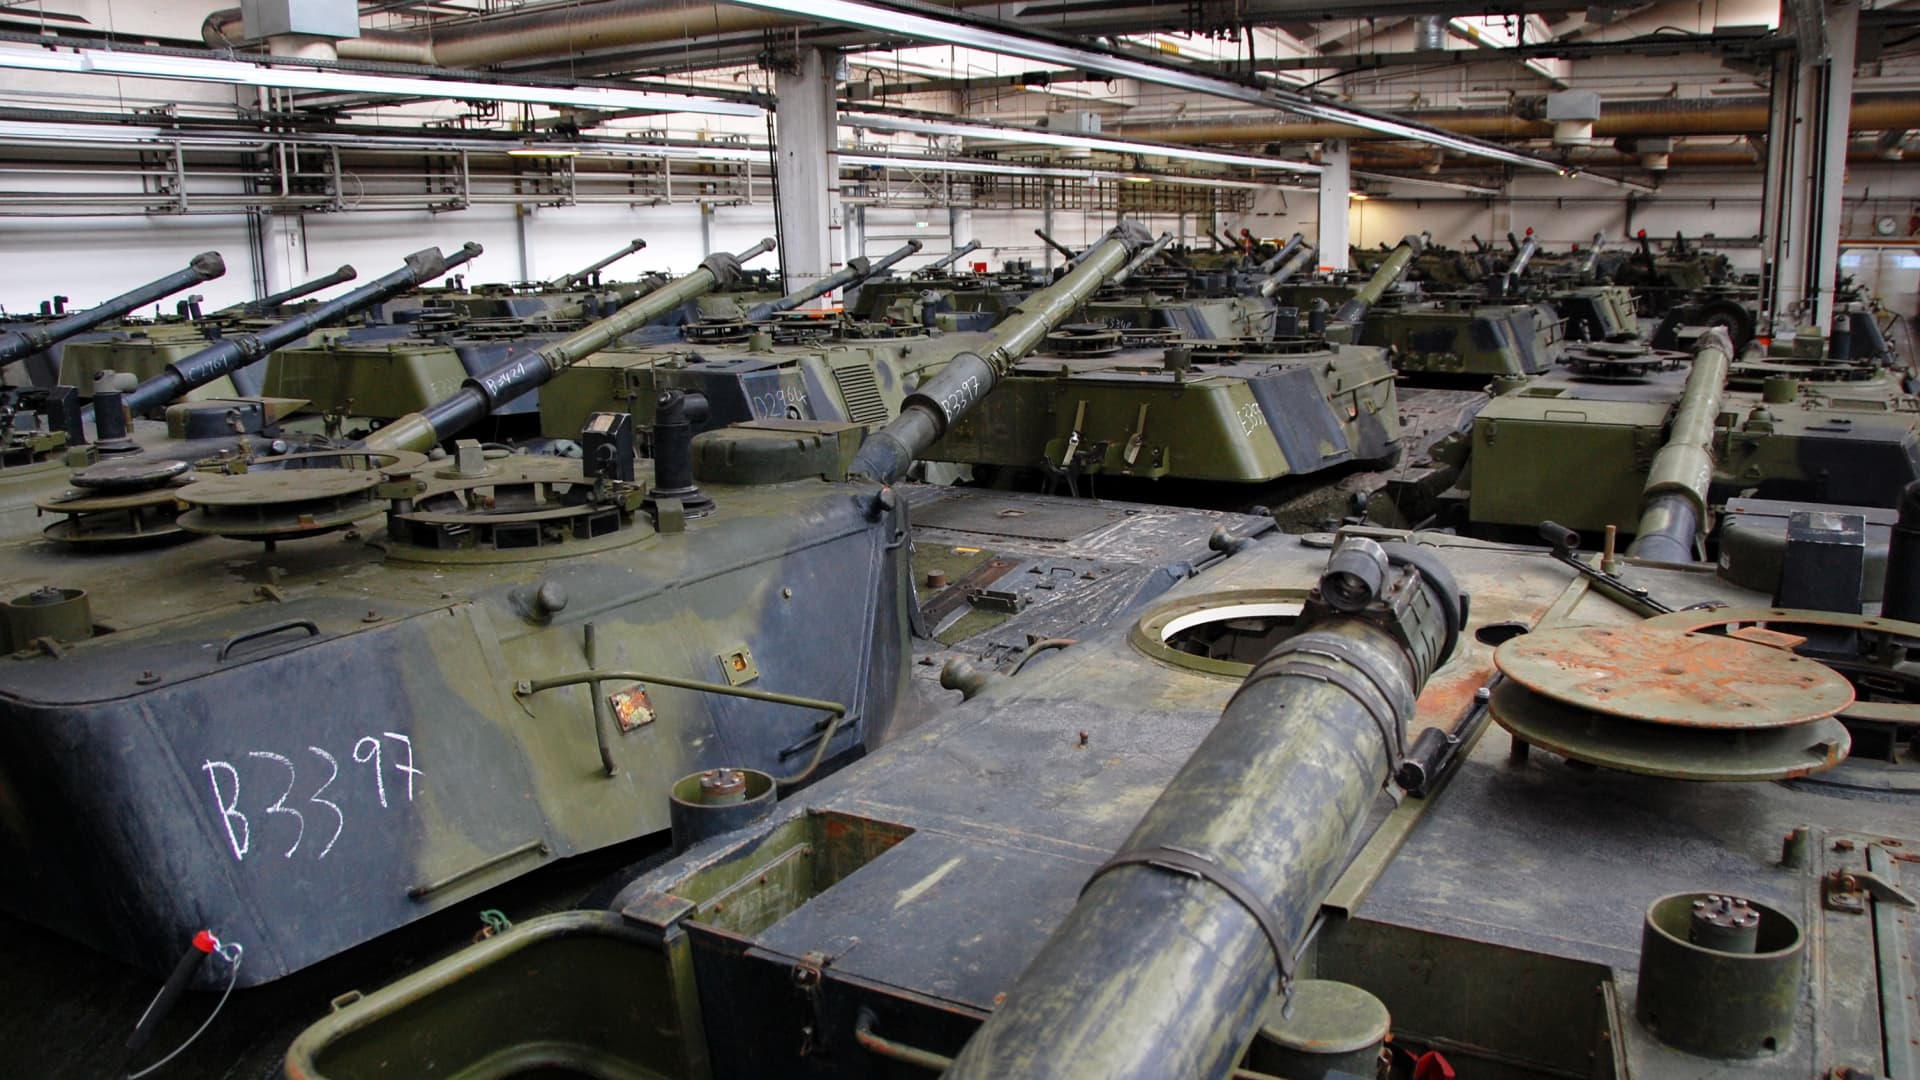 Leopard 1 A5 tanks from Danish stocks in a production hall where the Danfoss company had its storage and production facilities.